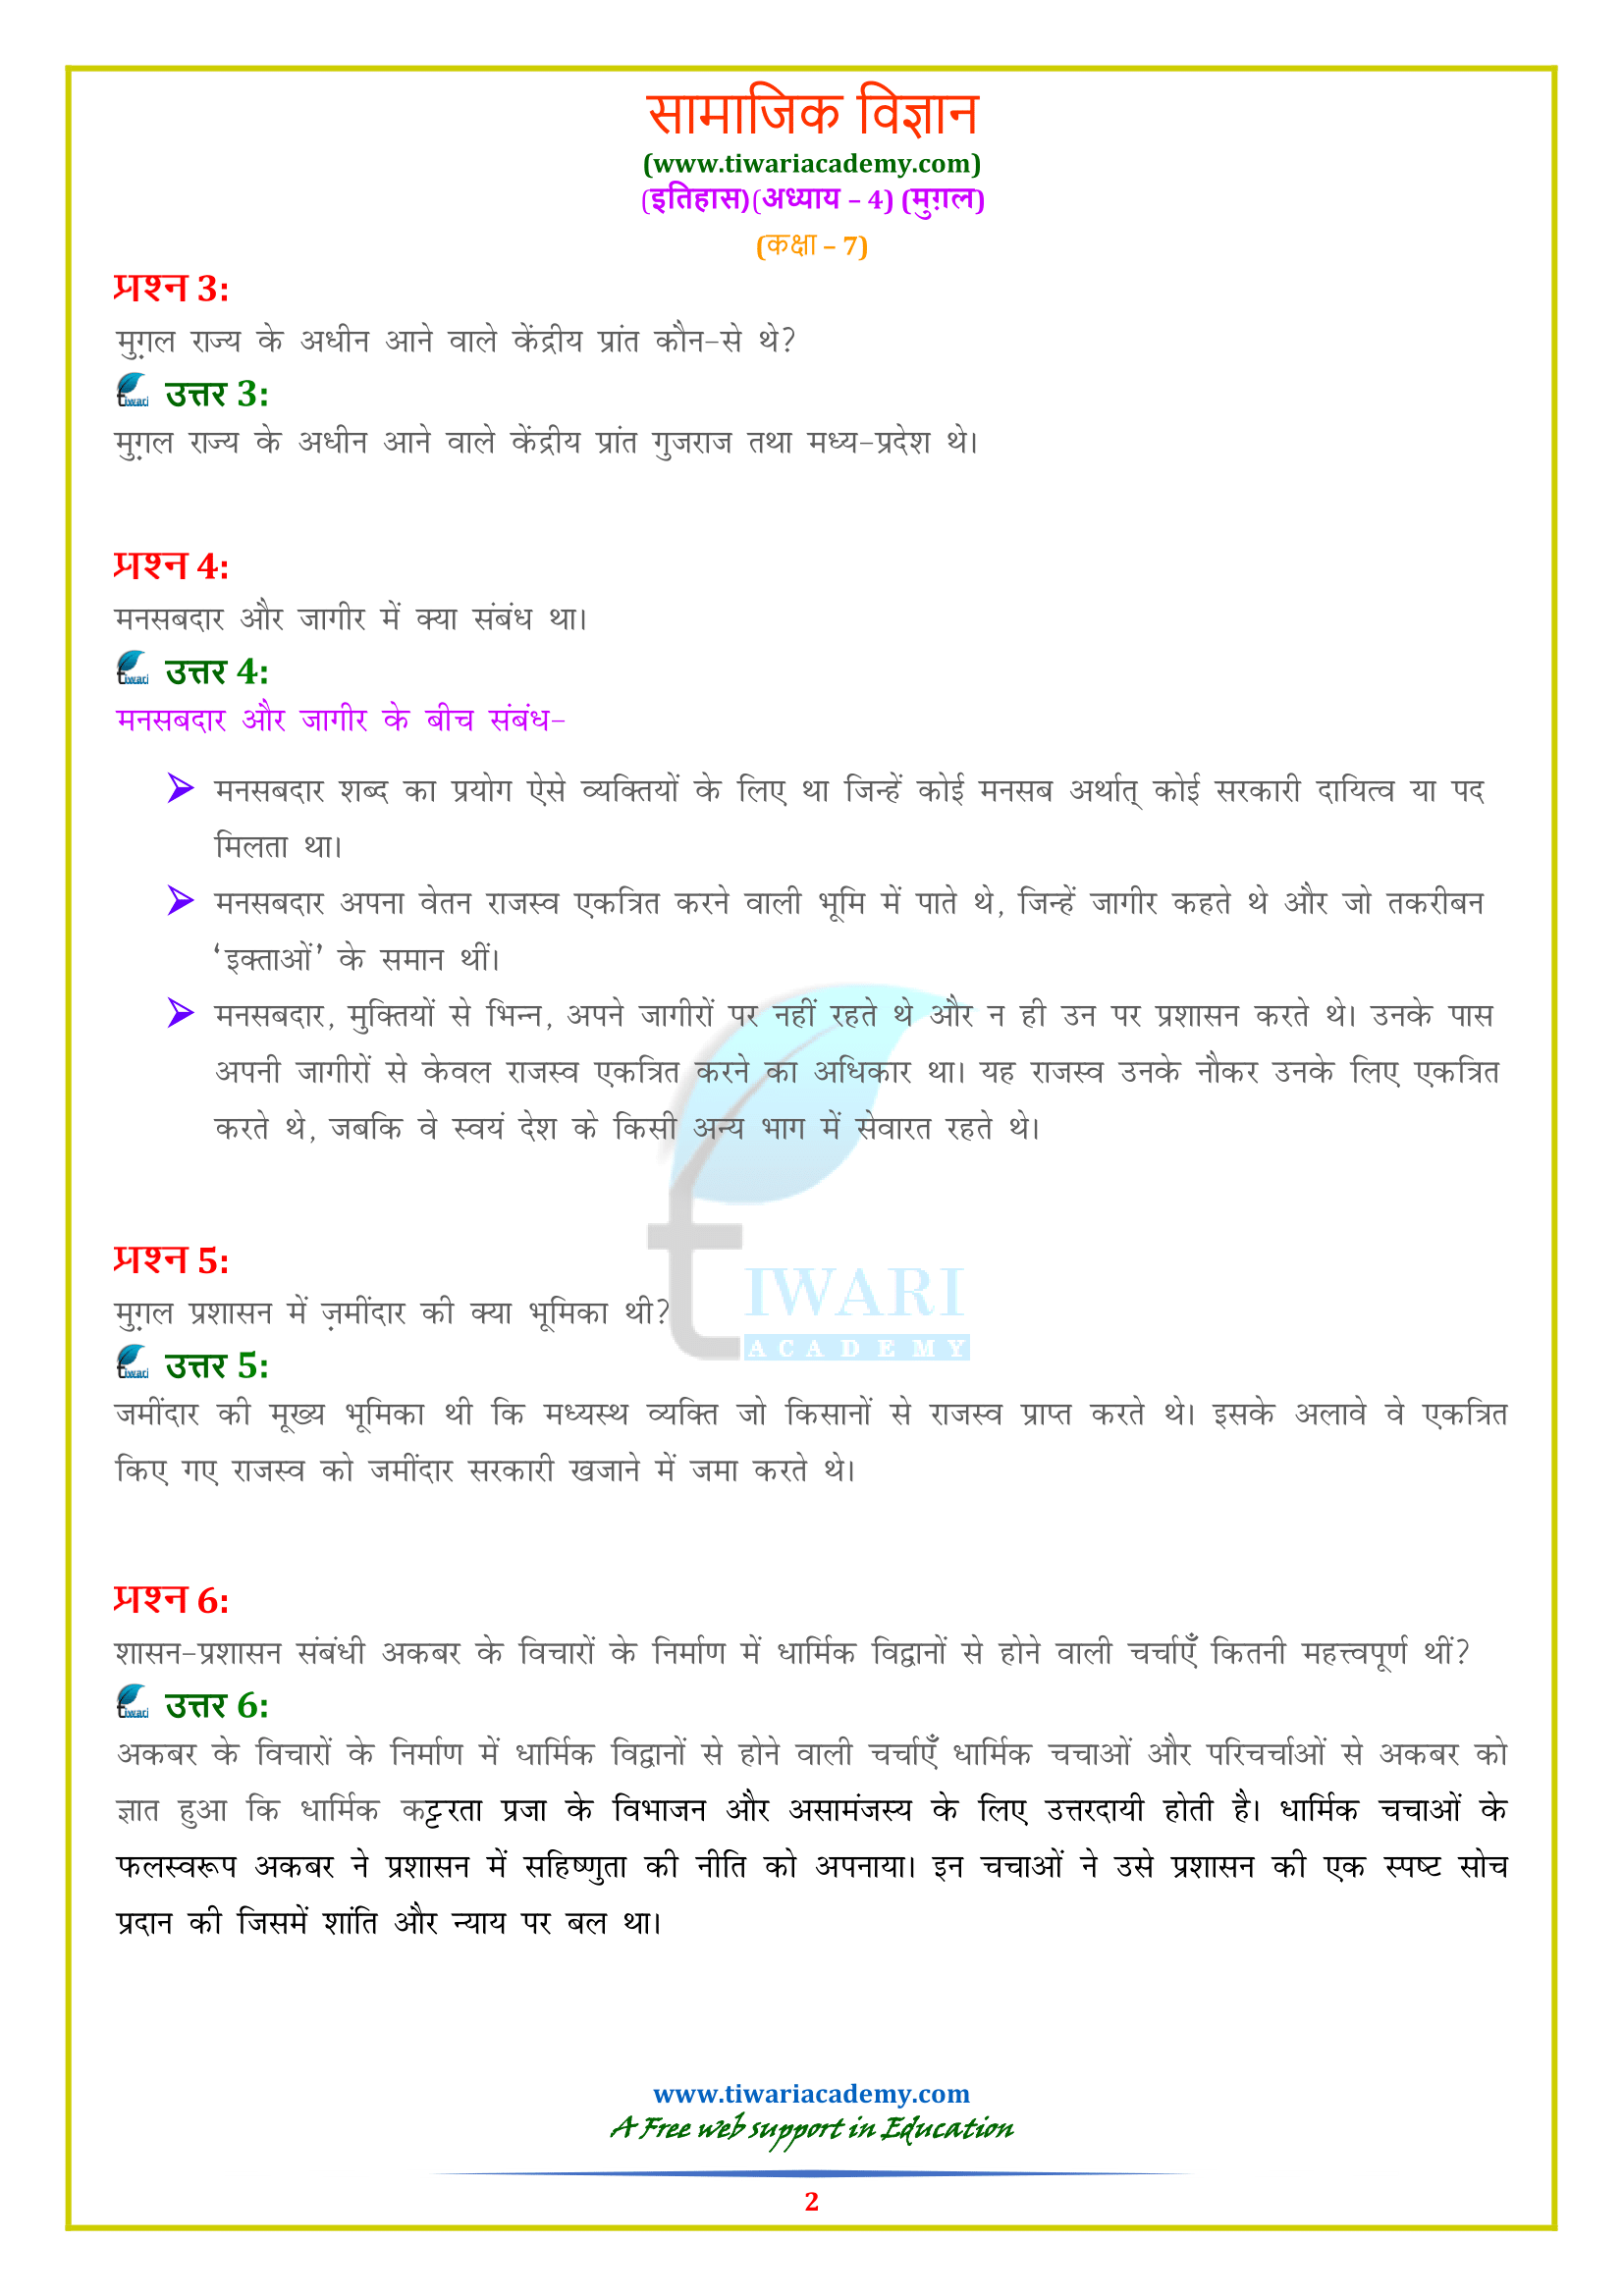 NCERT Solutions for Class 7 Social History chapter 4 in Hindi